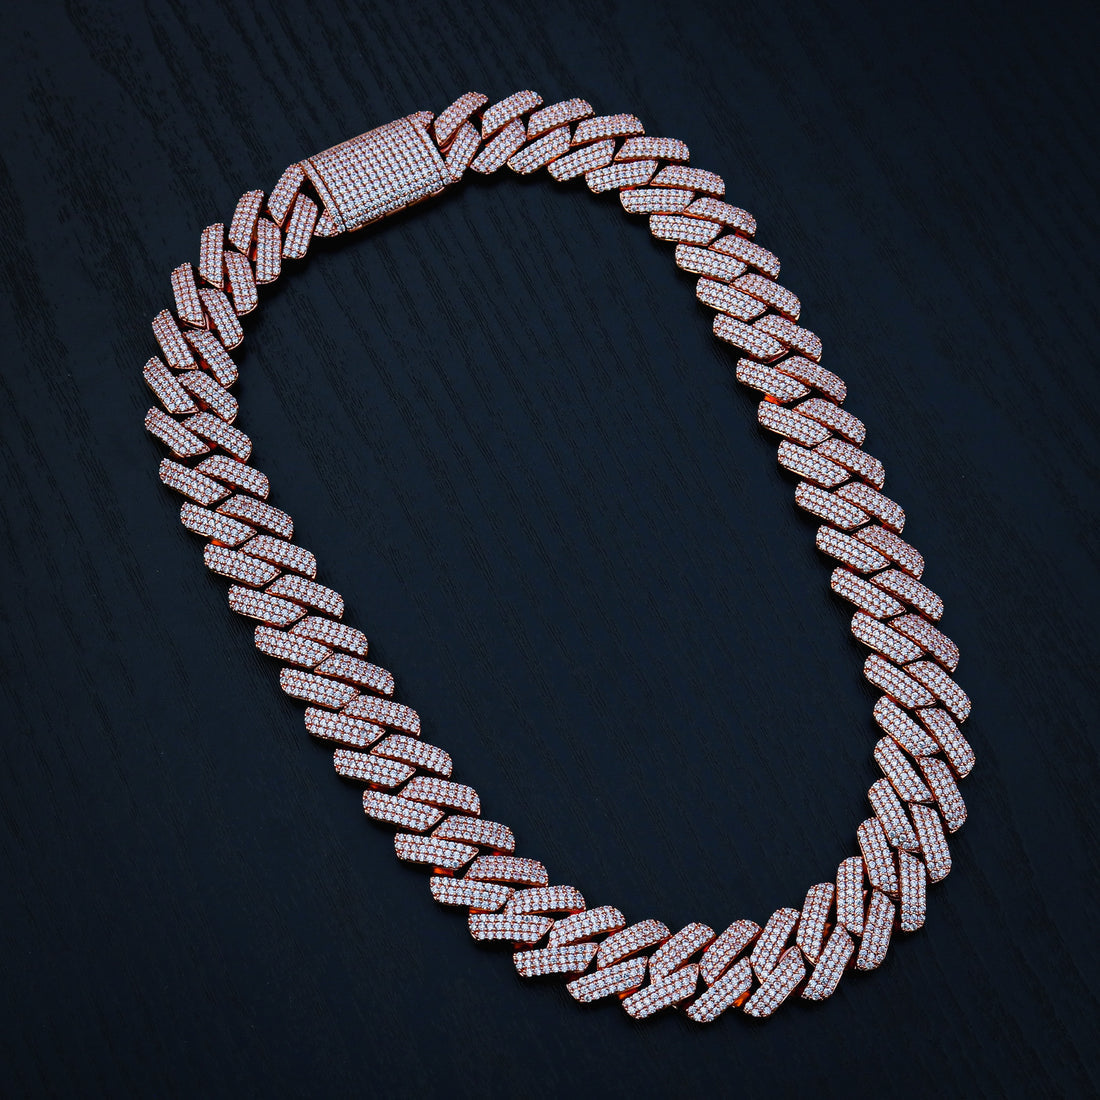 19mm Moissanite Prong Link Chain - Rose Gold over 925 Silver